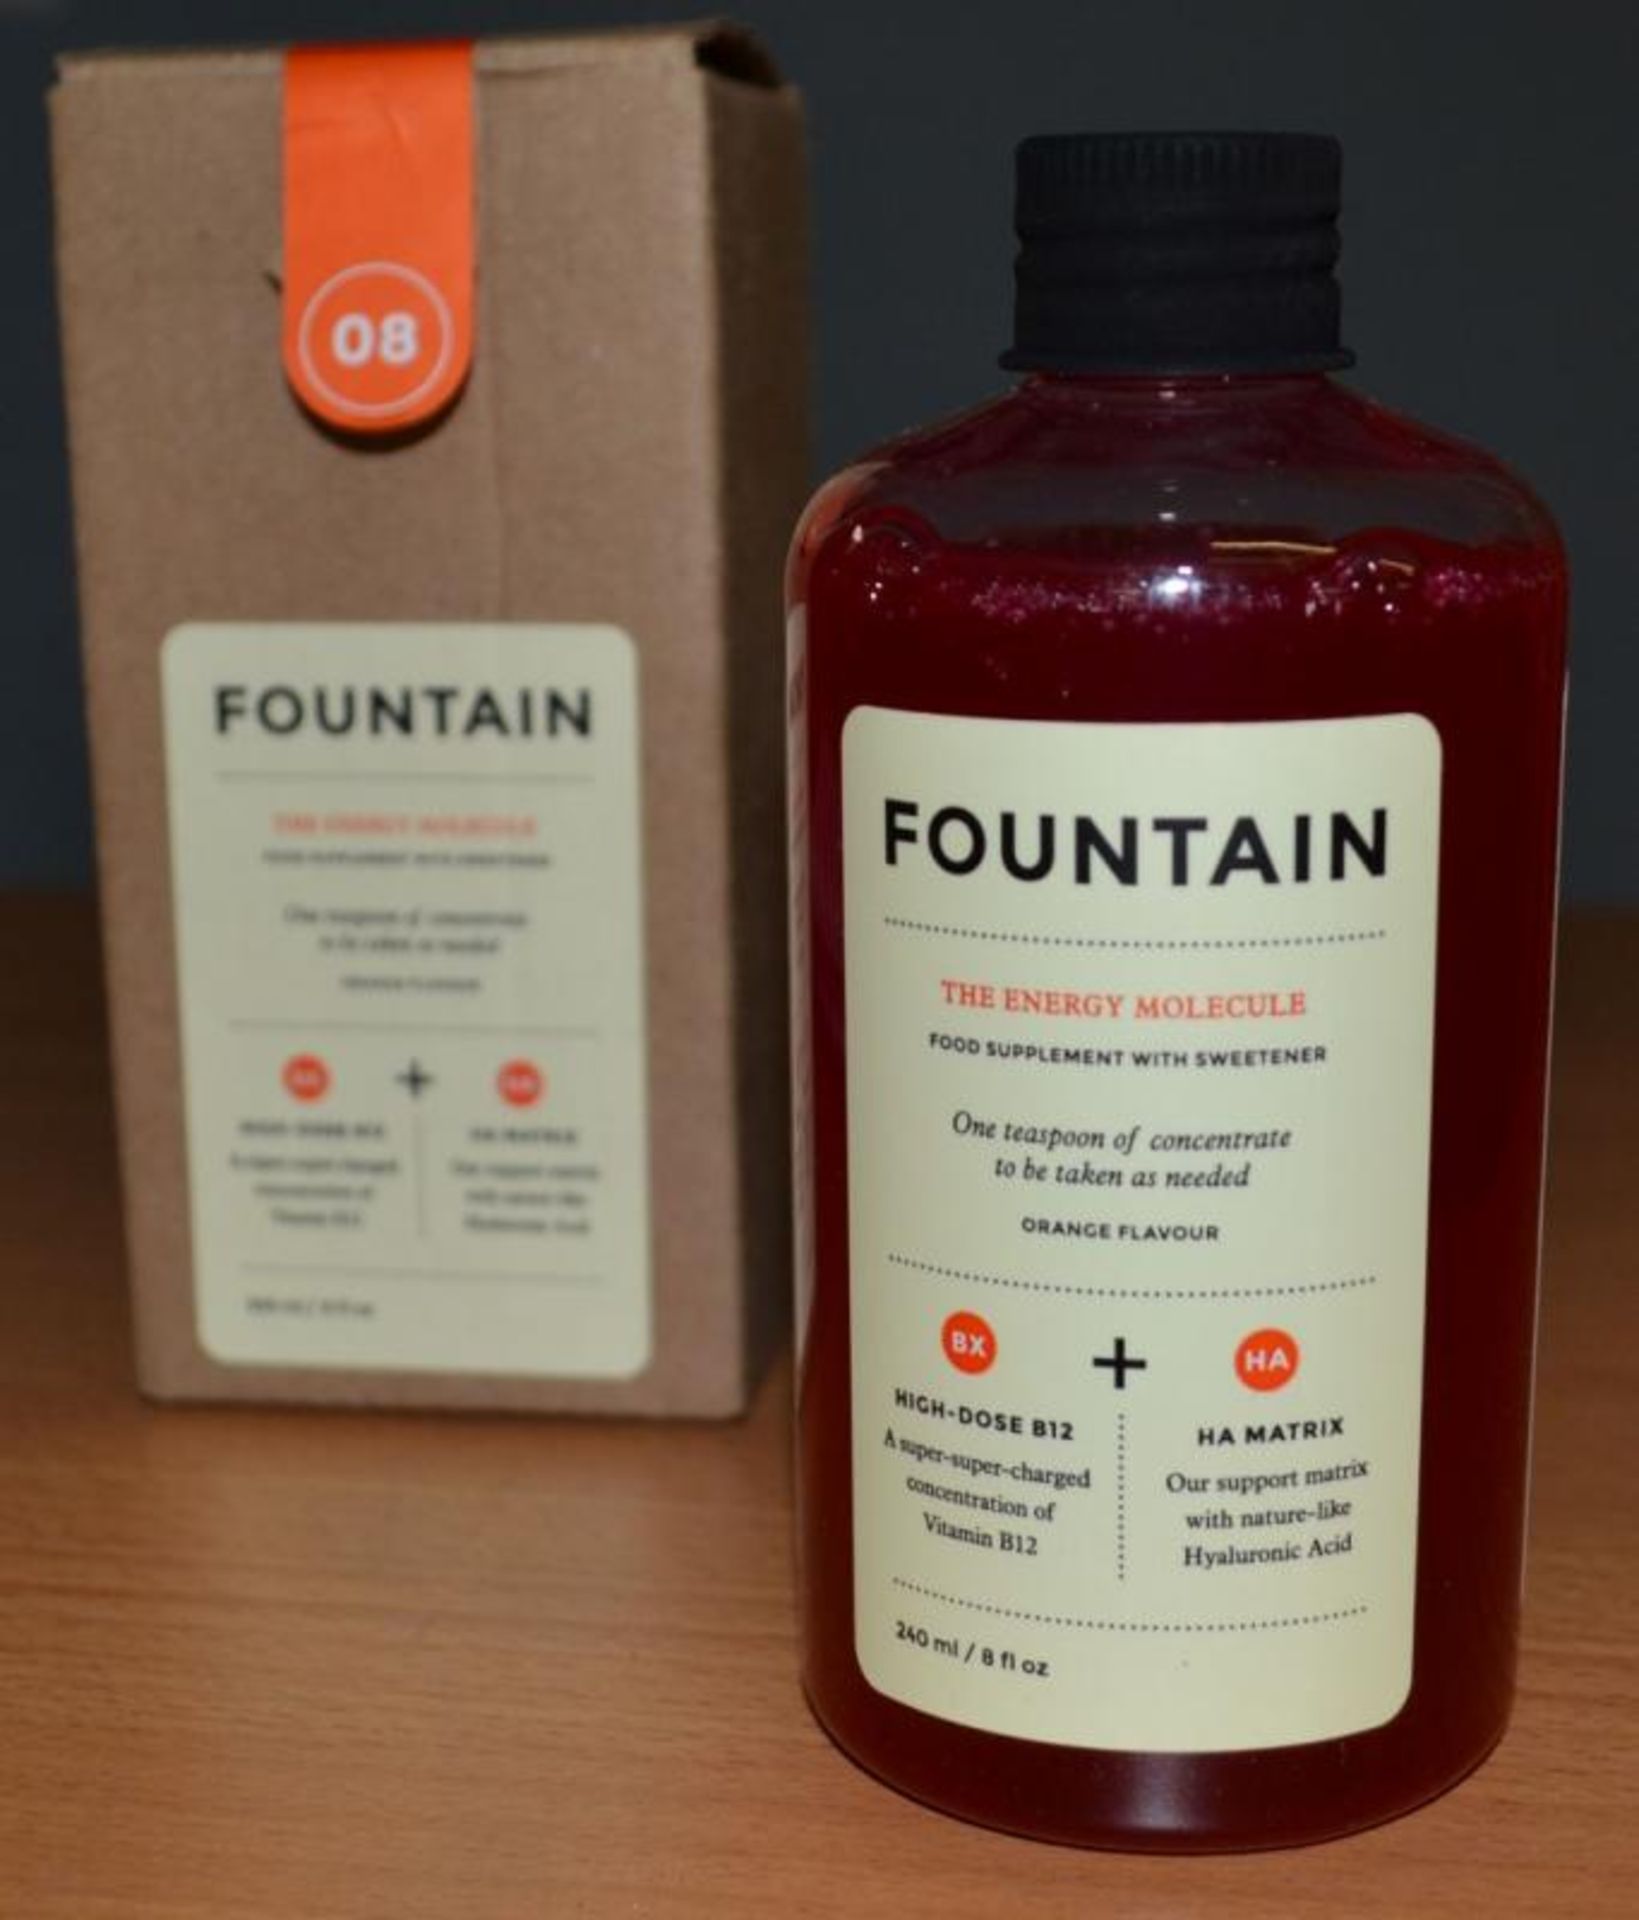 20 x 240ml Bottles of Fountain, The Energy Molecule Supplement - New & Boxed - CL185 - Ref: DRT0643 - Image 5 of 7